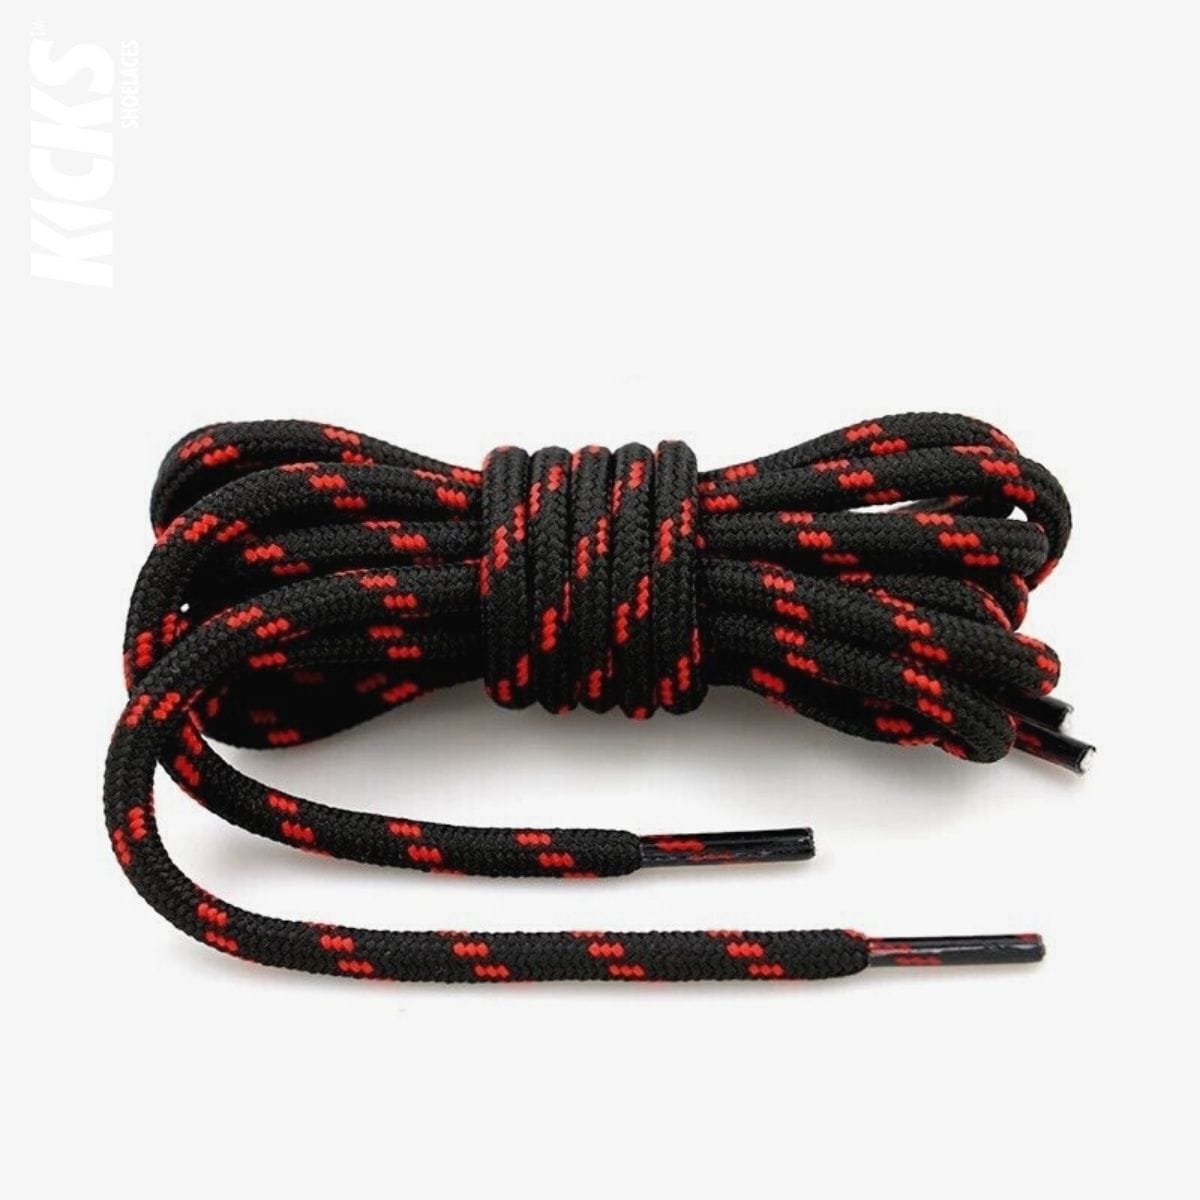 trekking-shoe-laces-united-states-in-black-and-red-shop-online